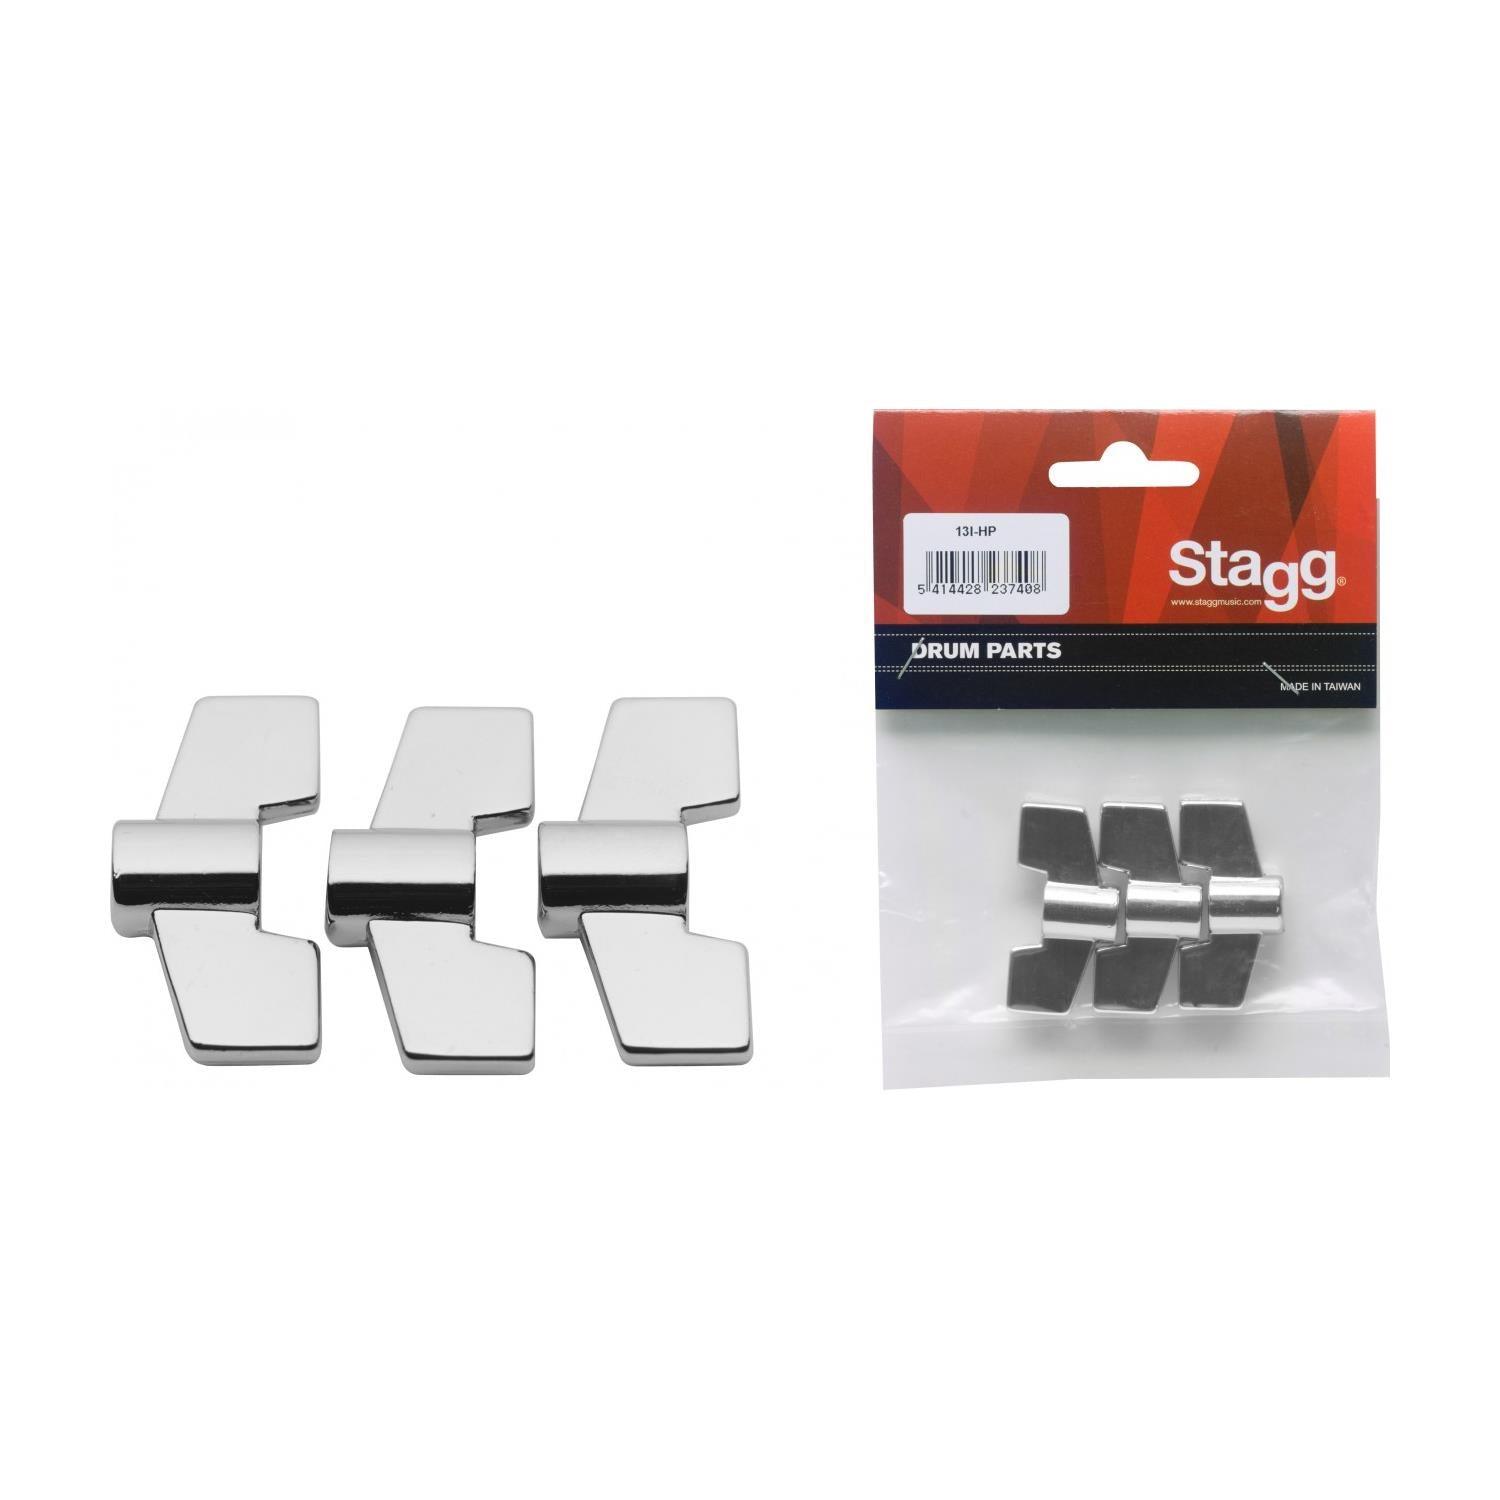 Stagg 13I-HP Drum Hardware 8mm Wing Nuts - DY Pro Audio